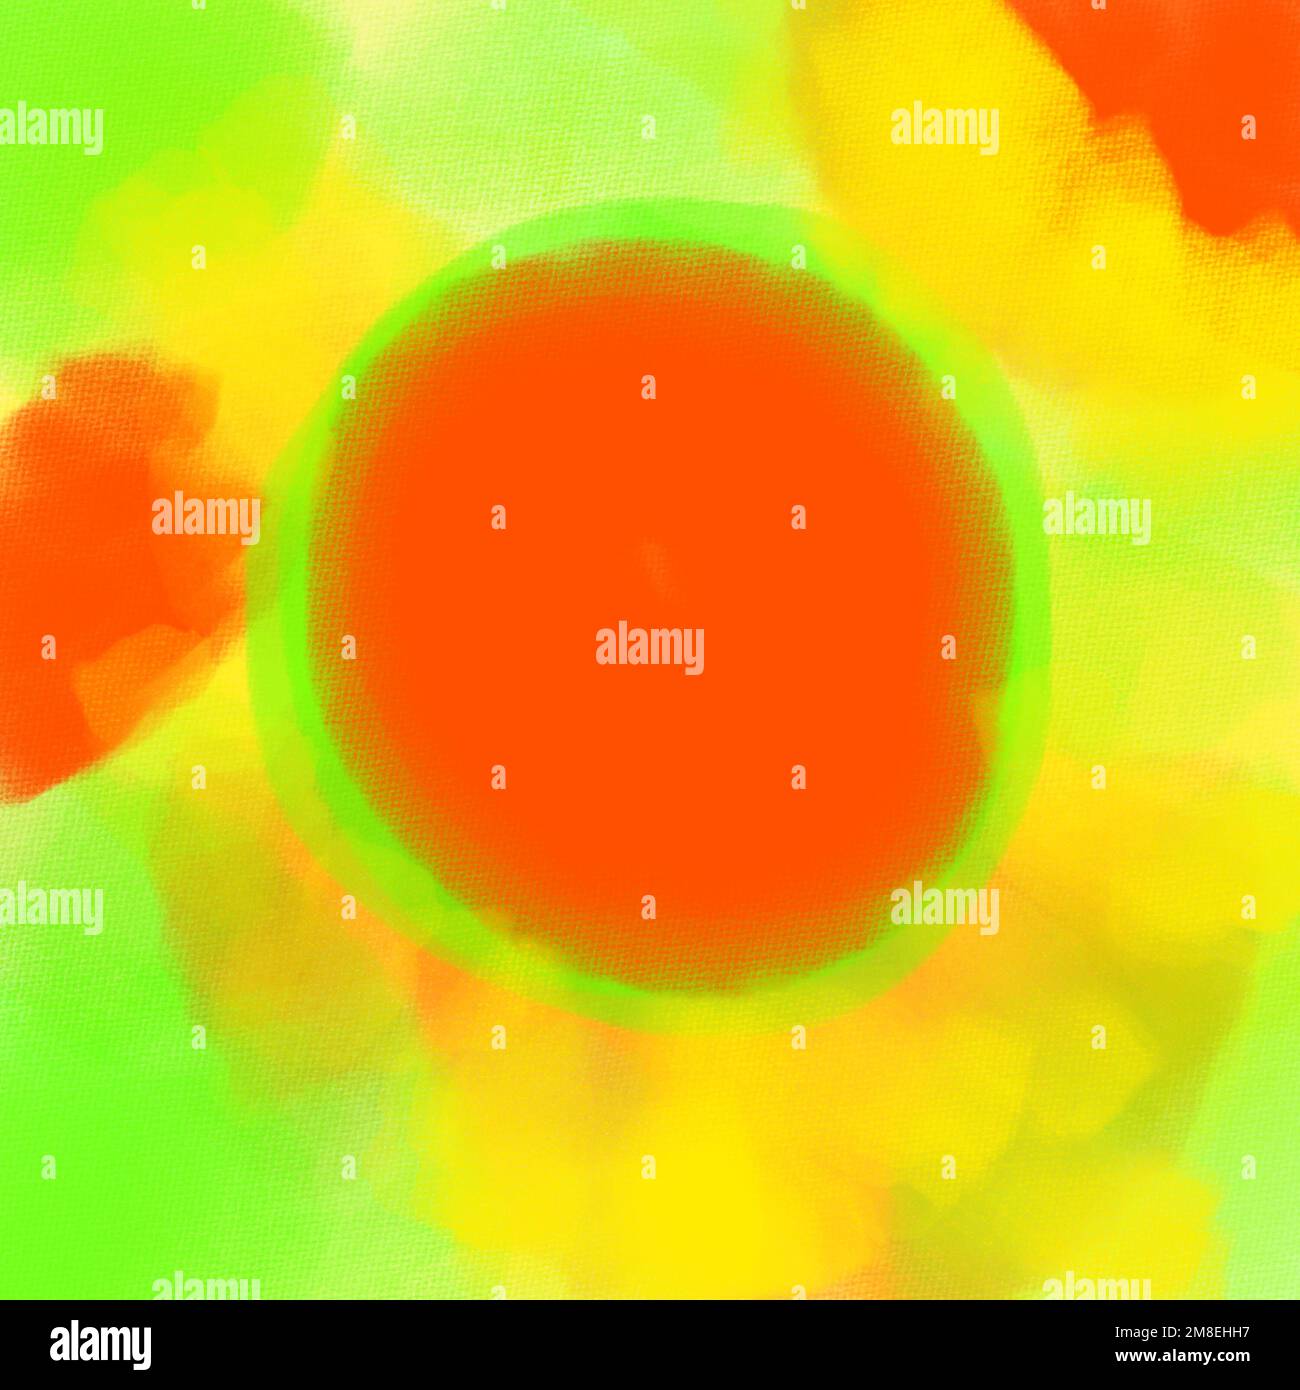 Abstract elements with room for copy orange red circle in the center ringed by fluorescent green in a square format accompanied by vivid yellows Stock Photo